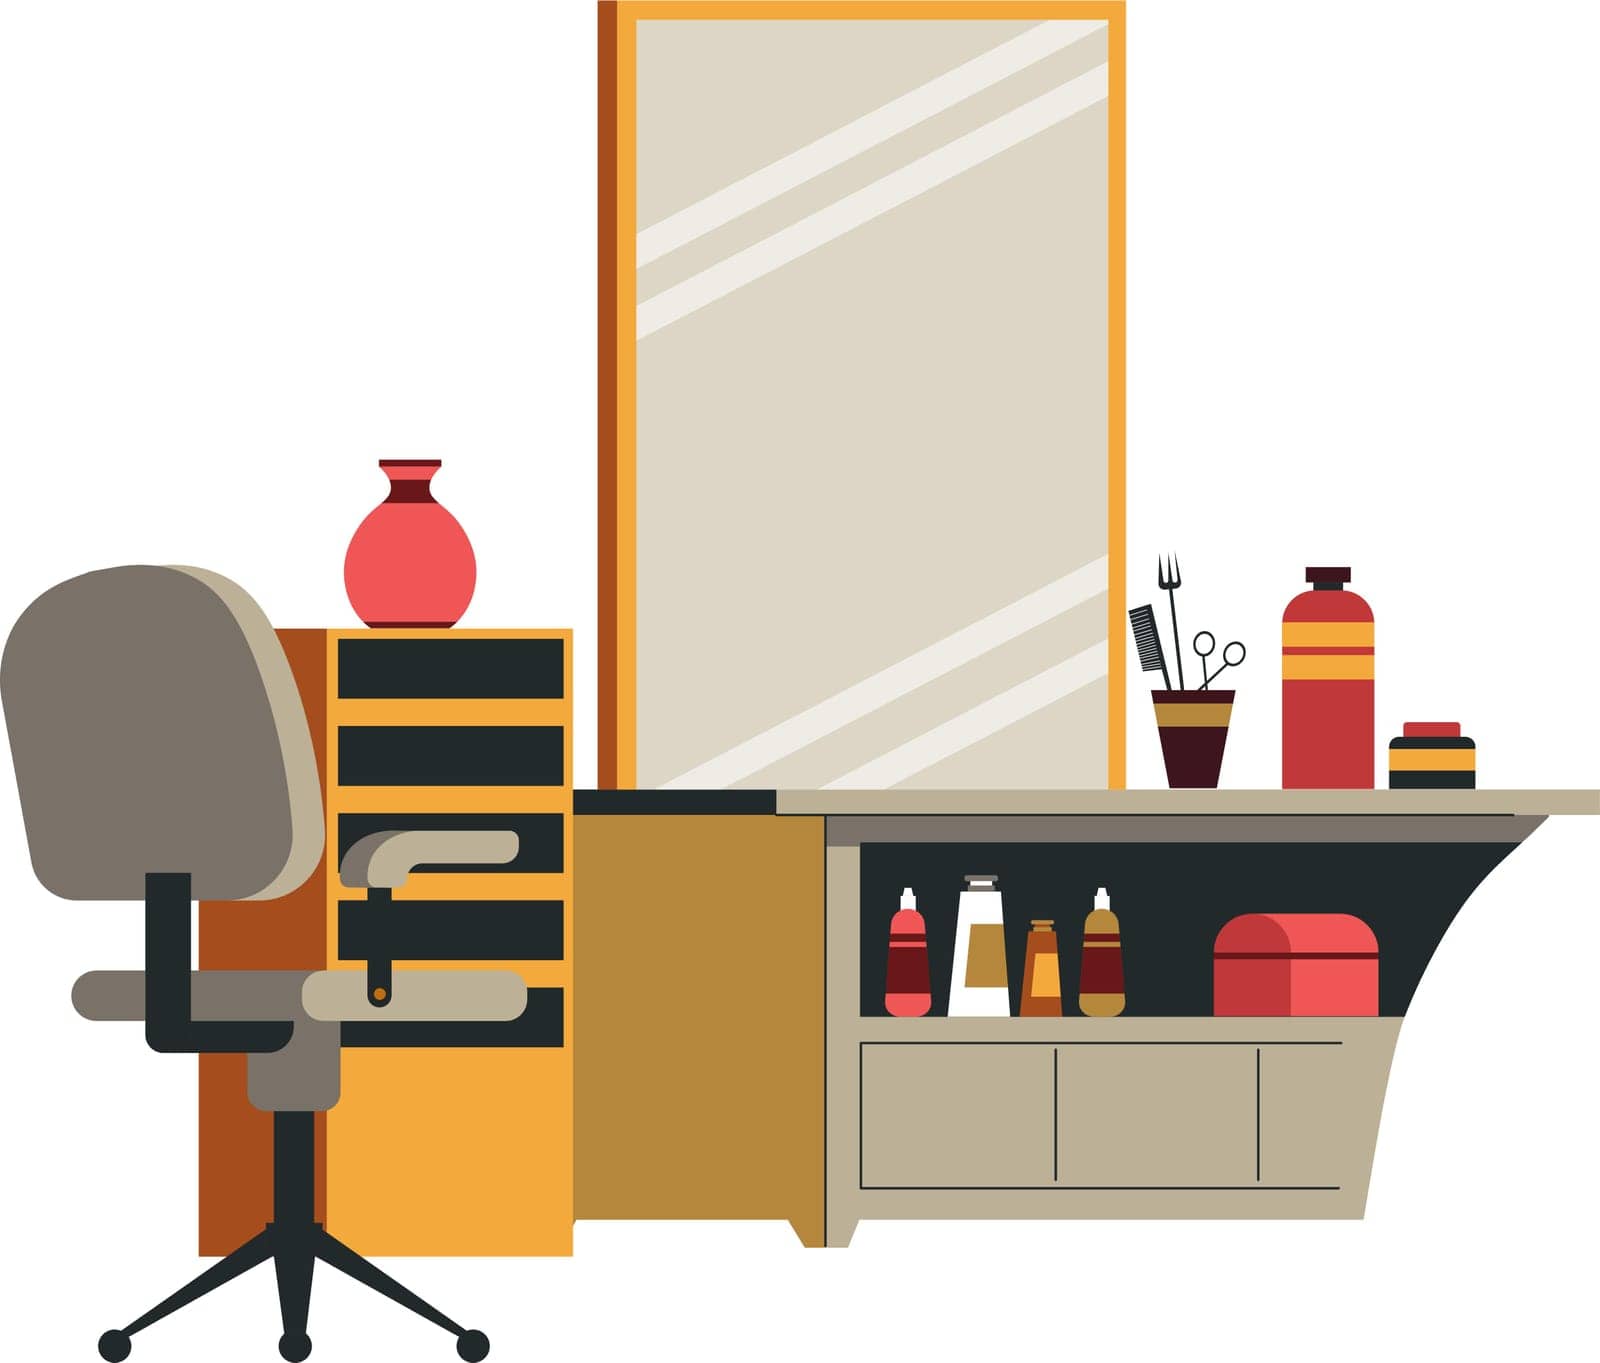 Interior design and furniture for barbershop, isolated workplace of table with drawers, mirror and appliances for work. Cutting hair and trimming beard, modern space for hairdo. Vector in flat style